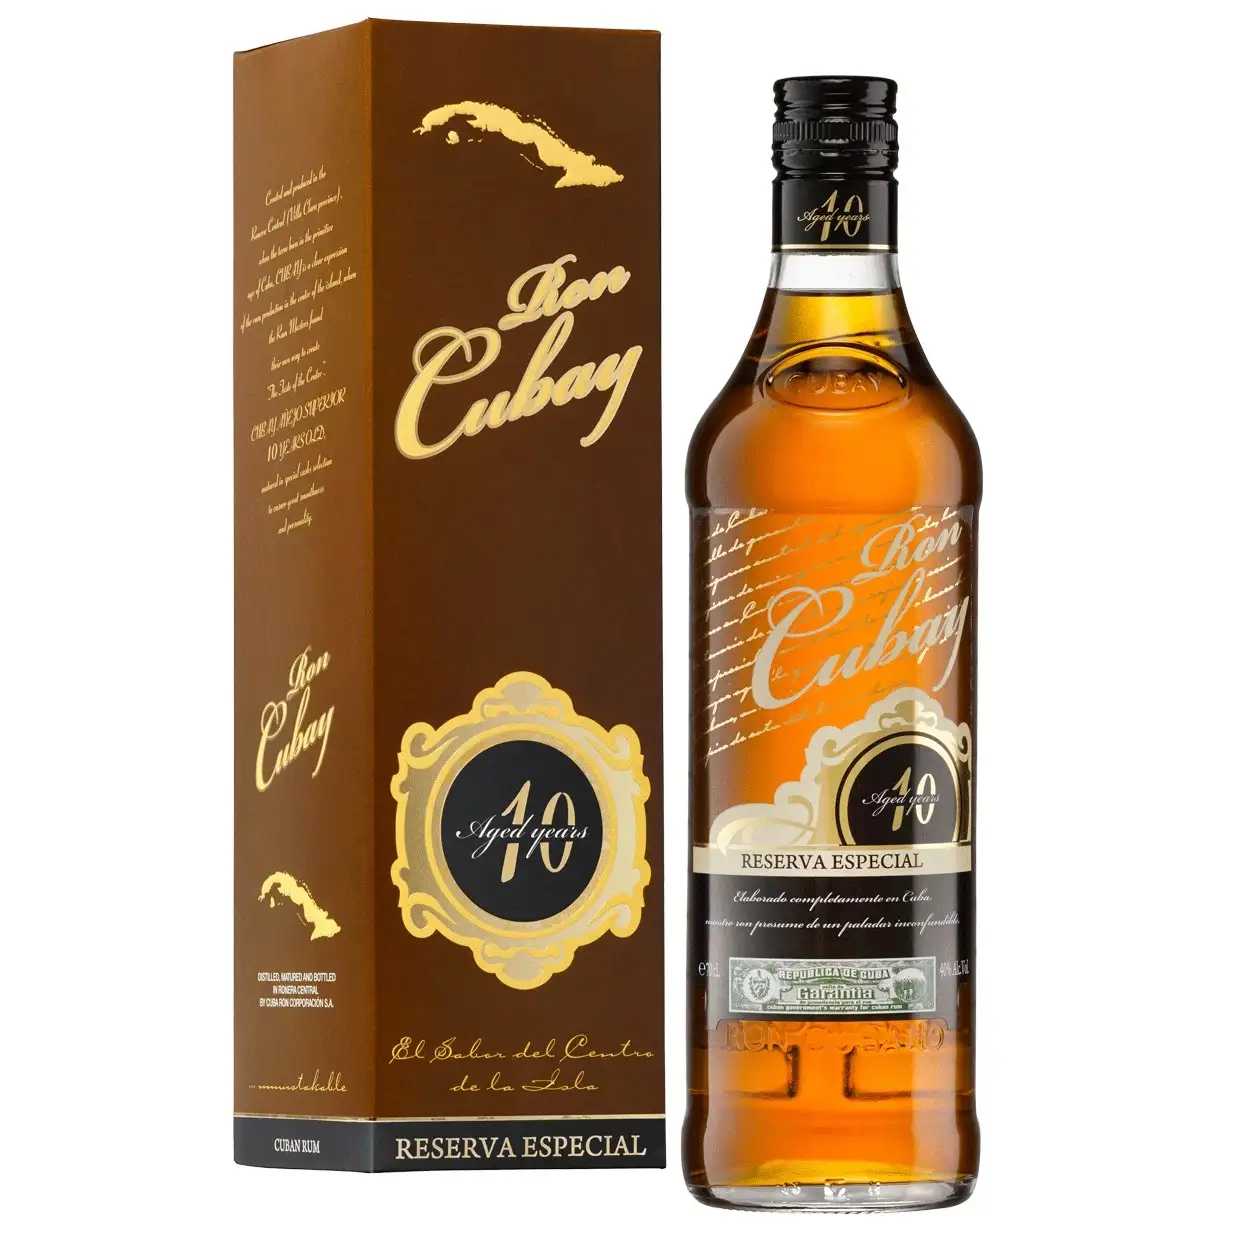 Image of the front of the bottle of the rum Ron Cubay Reserva Especial